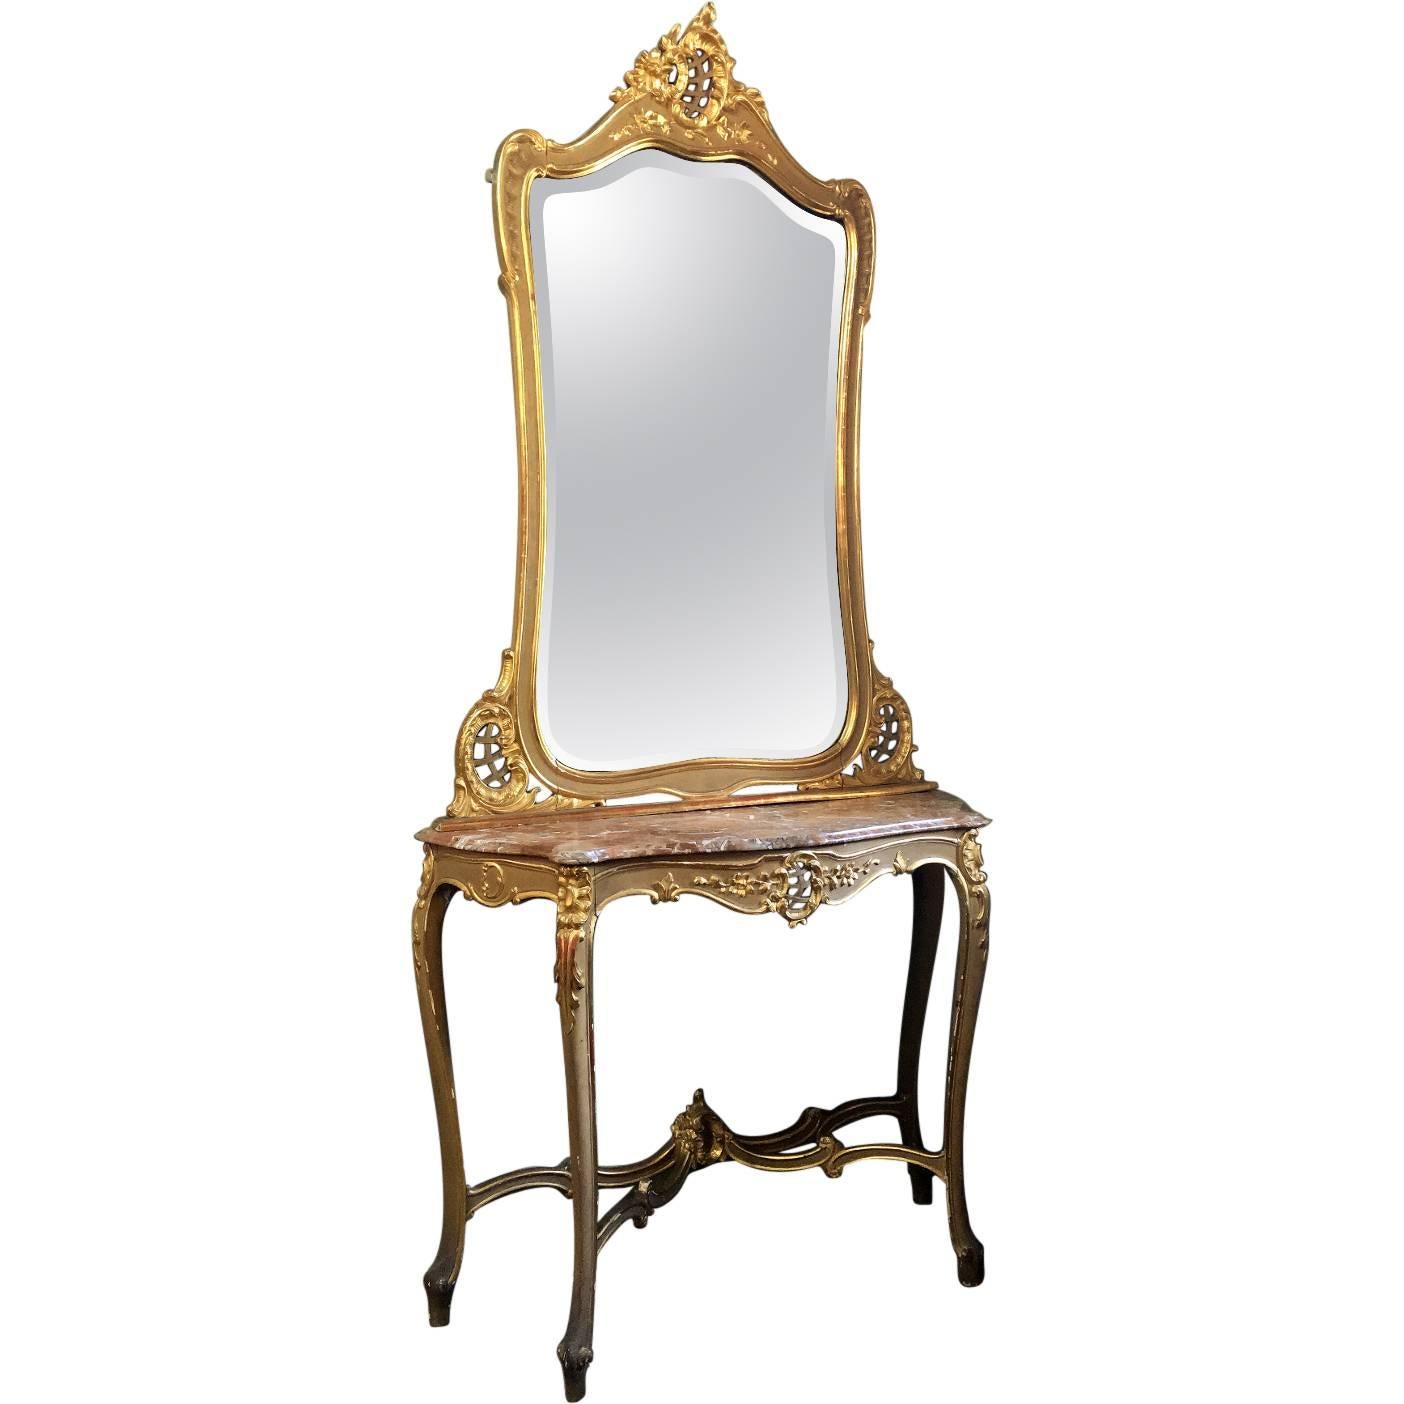 19th Century Italian Rococo Hand-Painted Marble Top Giltwood Console with Mirror